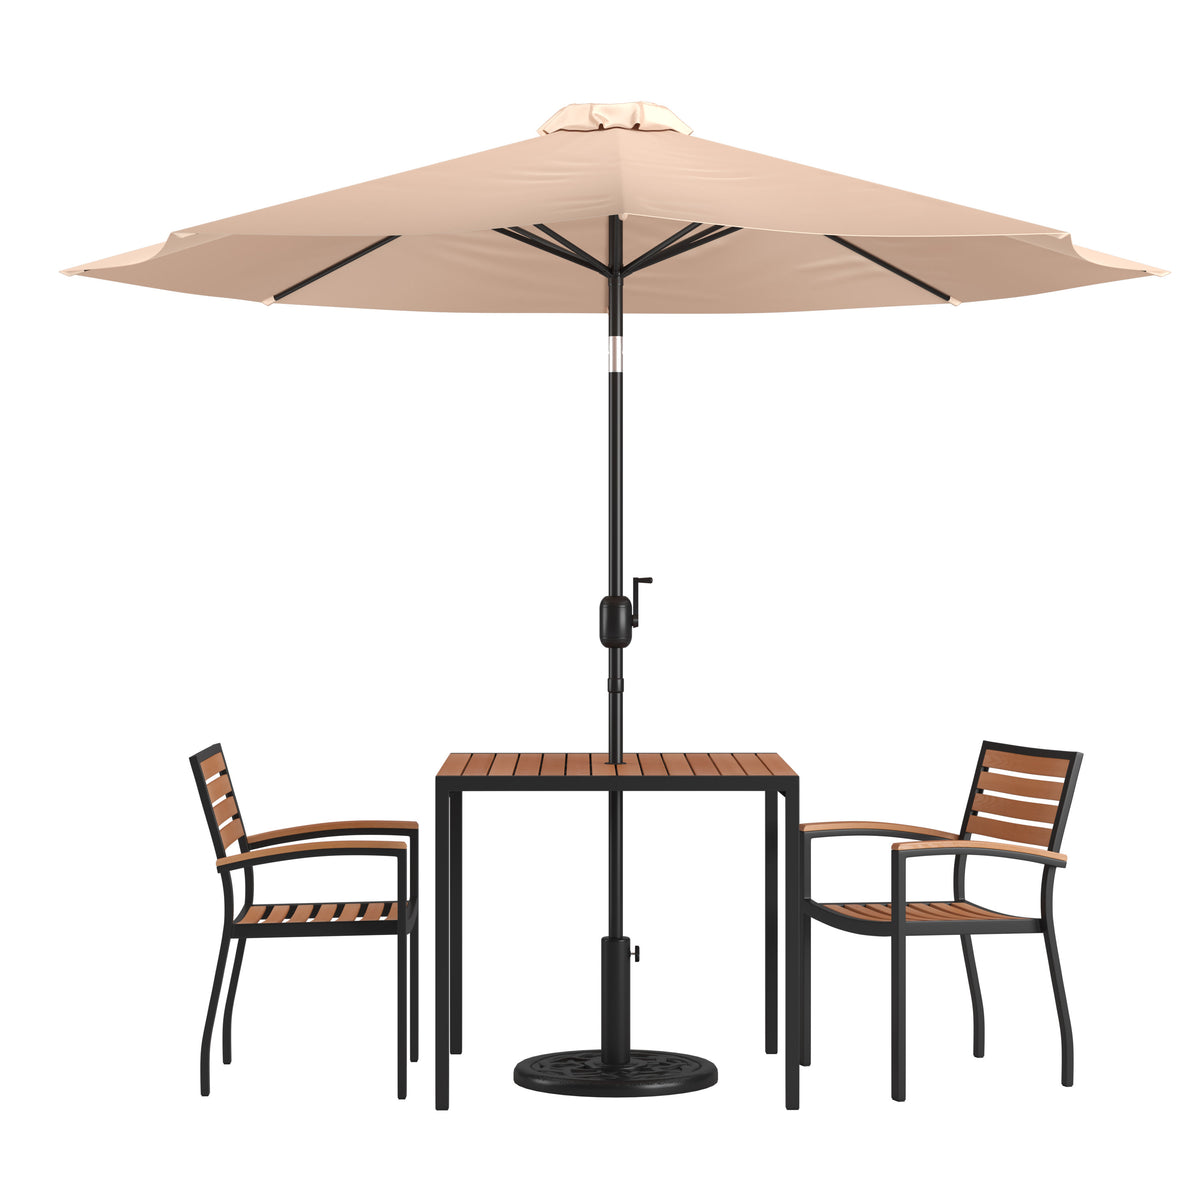 Tan |#| 35inch Square Faux Teak Patio Table, 2 Chairs and Tan 9FT Patio Umbrella with Base